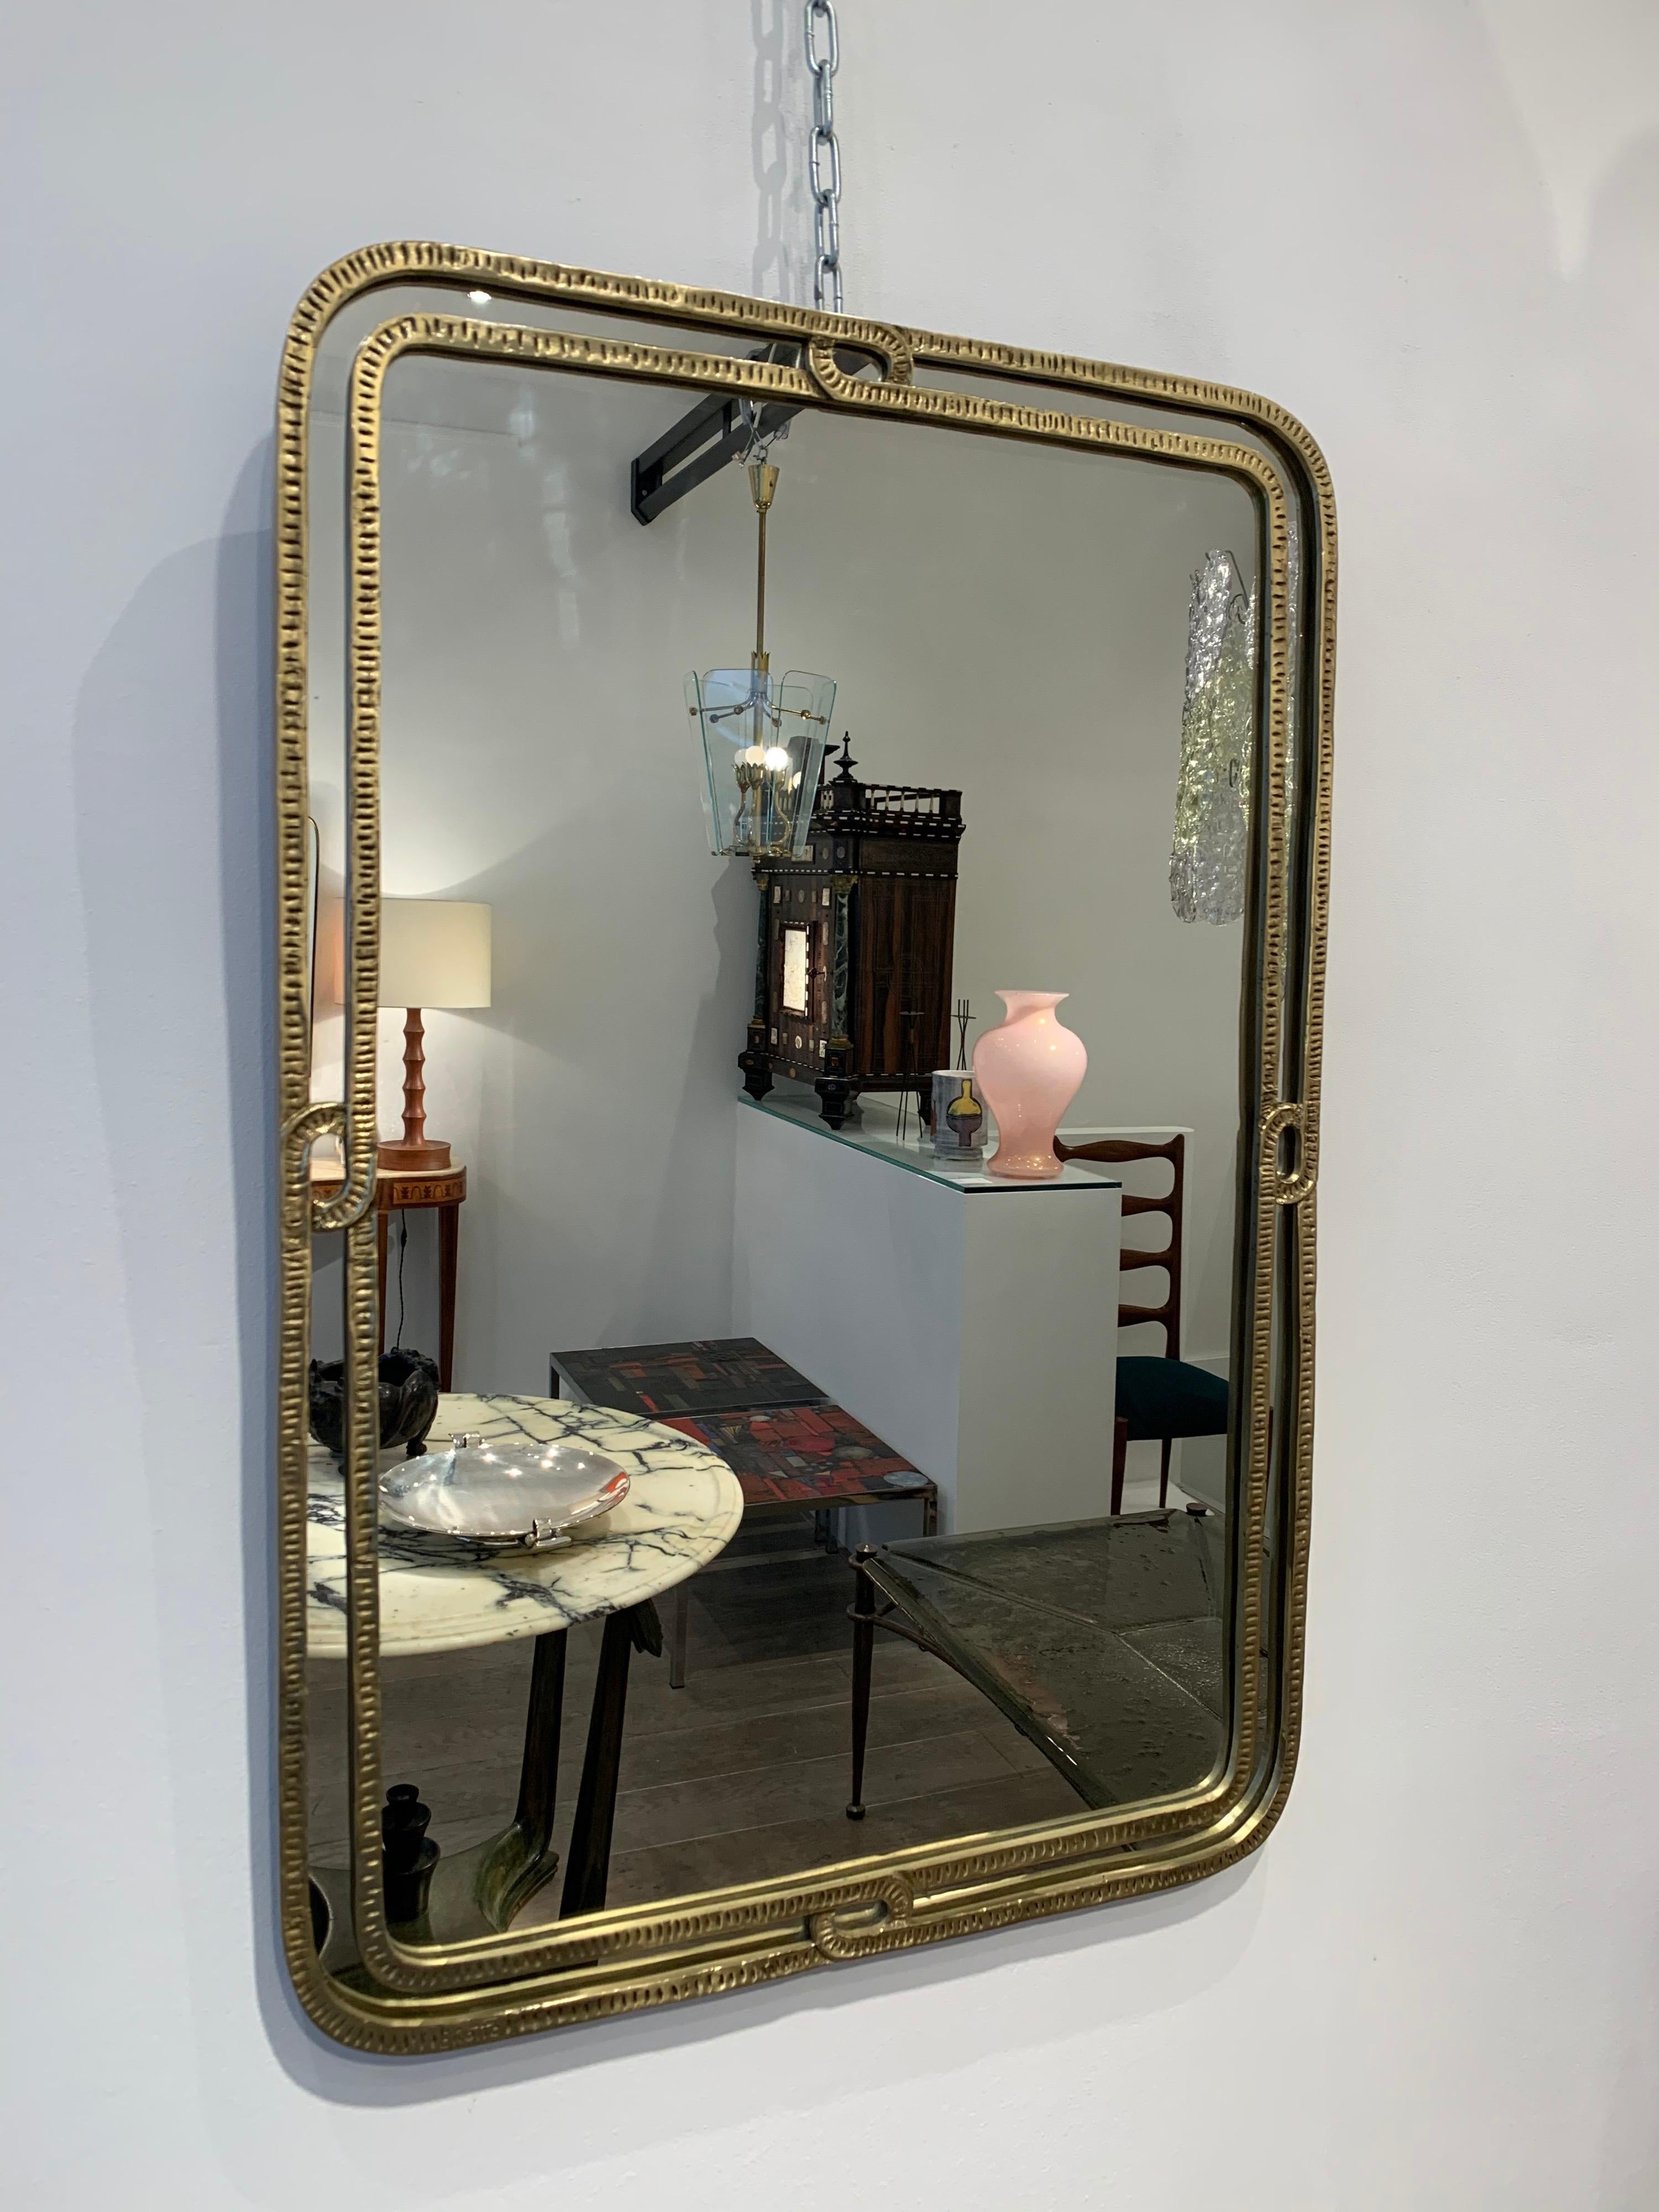 Angelo Brotto is a famous Italian designer, who specialized in lights and wall decoration. This mirror, which signed, is something rare and very elegant in his work.